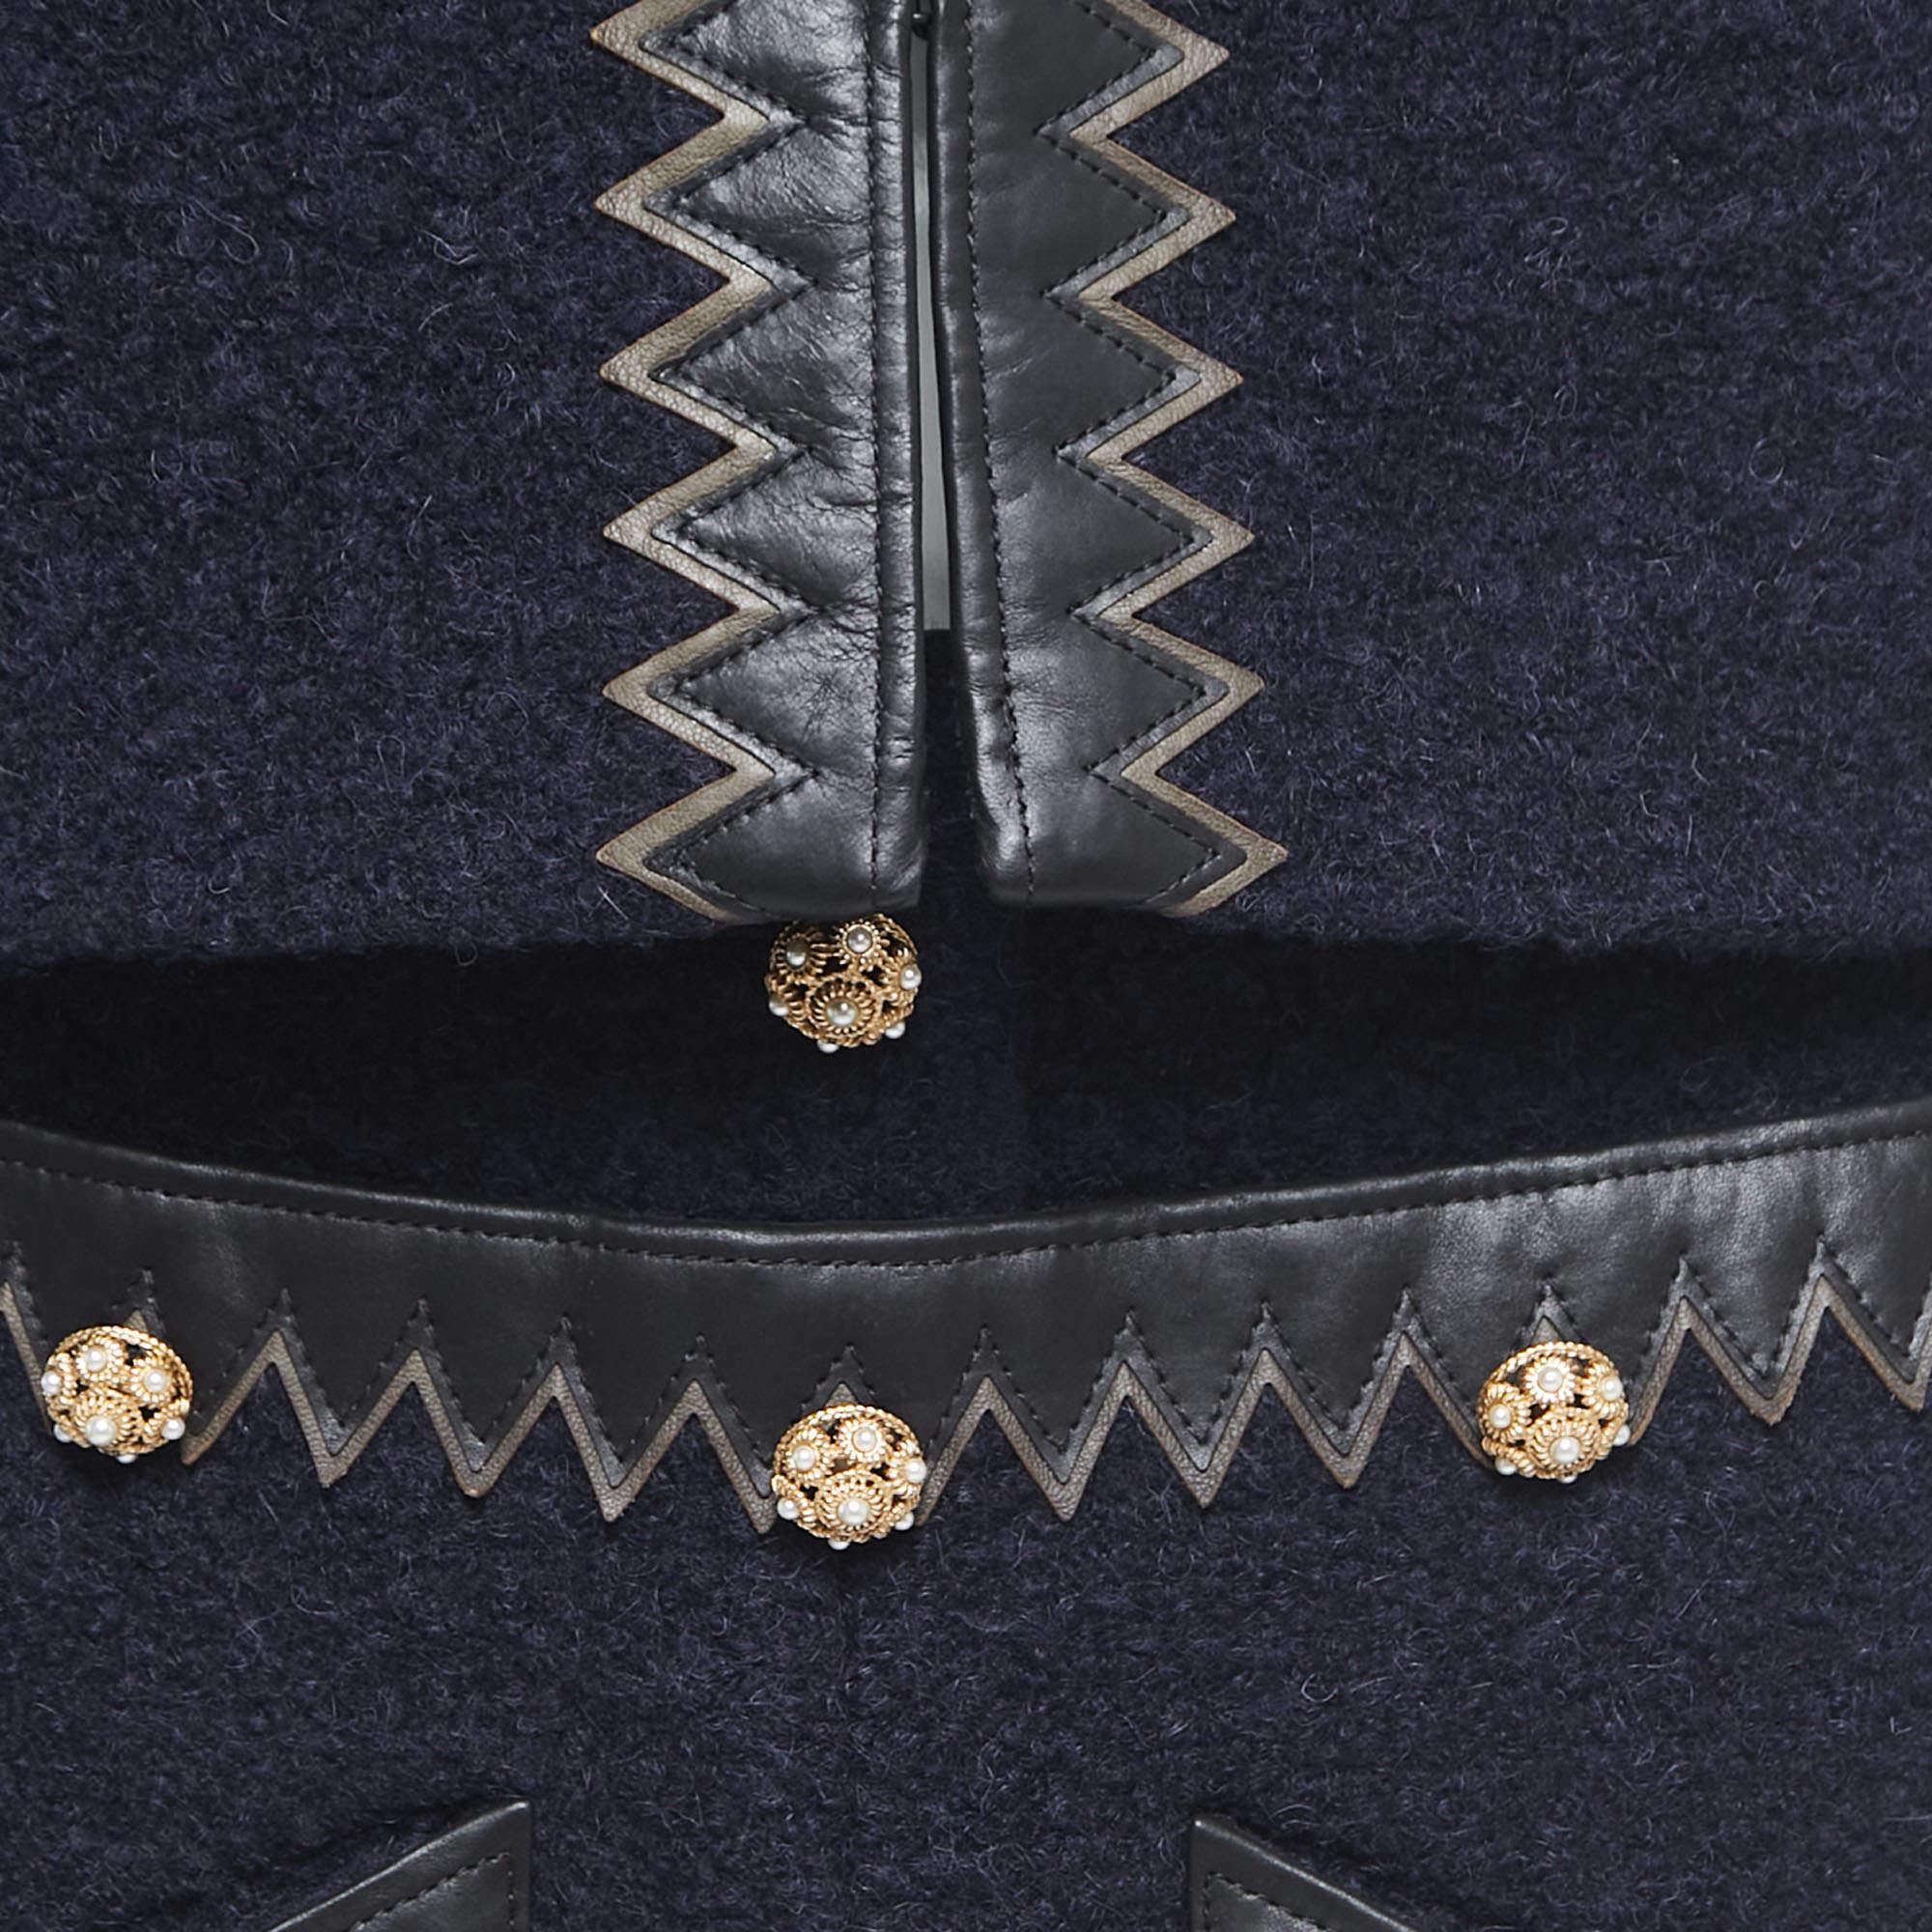 Chanel Navy Blue Boucle Wool Leather Trimmed Salzburg Skirt Suit  In Good Condition For Sale In Dubai, Al Qouz 2